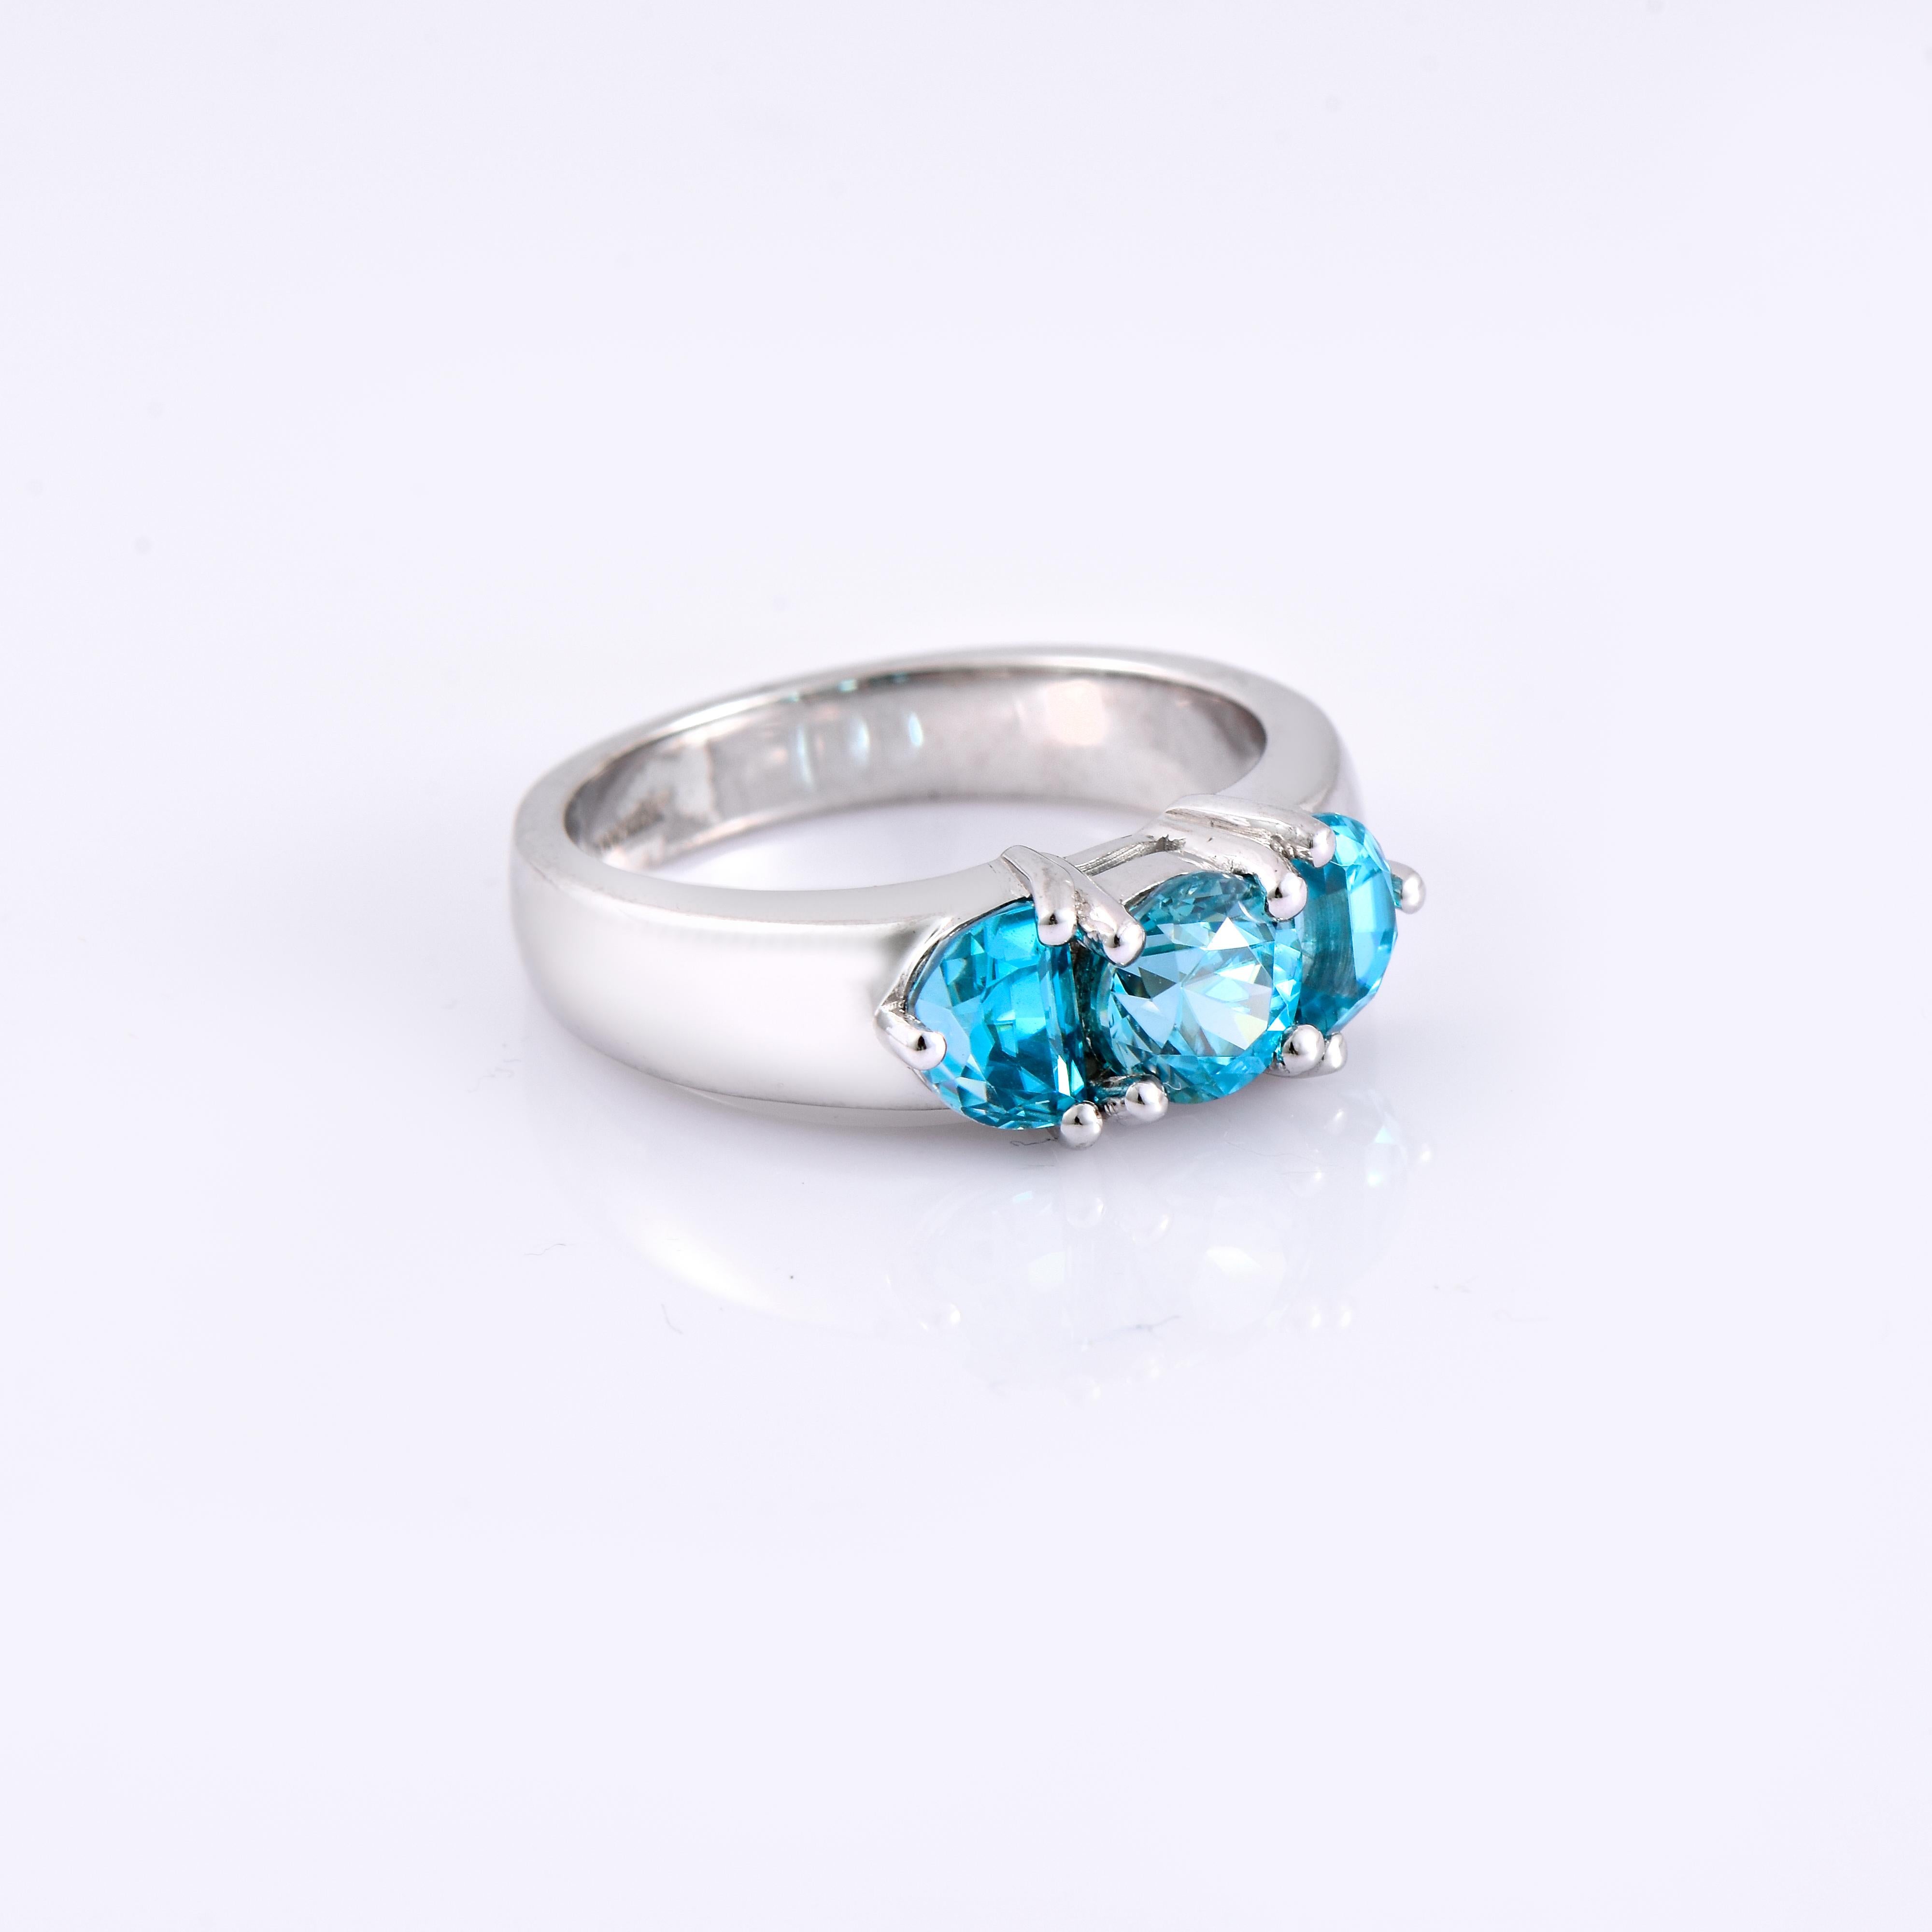 Contemporary Orloff of Denmark, 3.41 ct Natural Blue Zircon Ring in 925 Sterling Silver For Sale